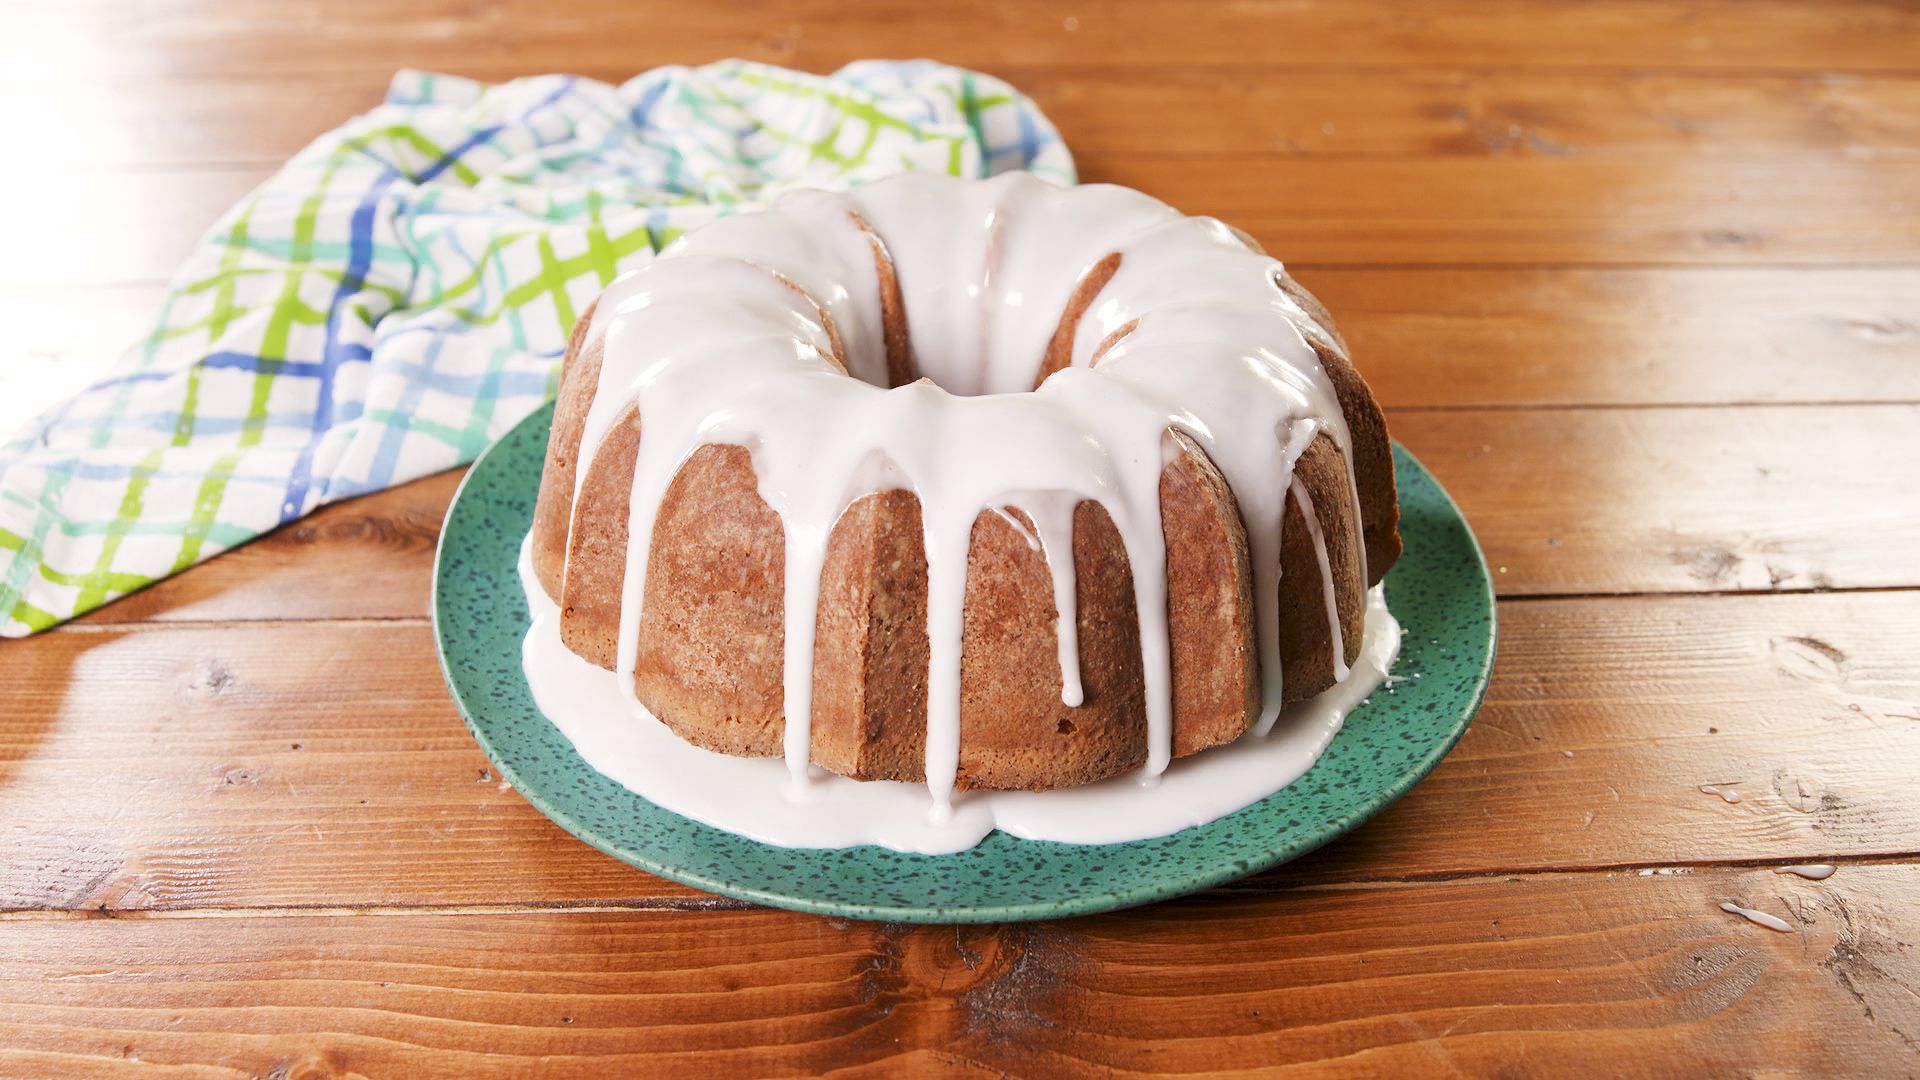 The Best 7-Up Cake (+Video) - The Country Cook